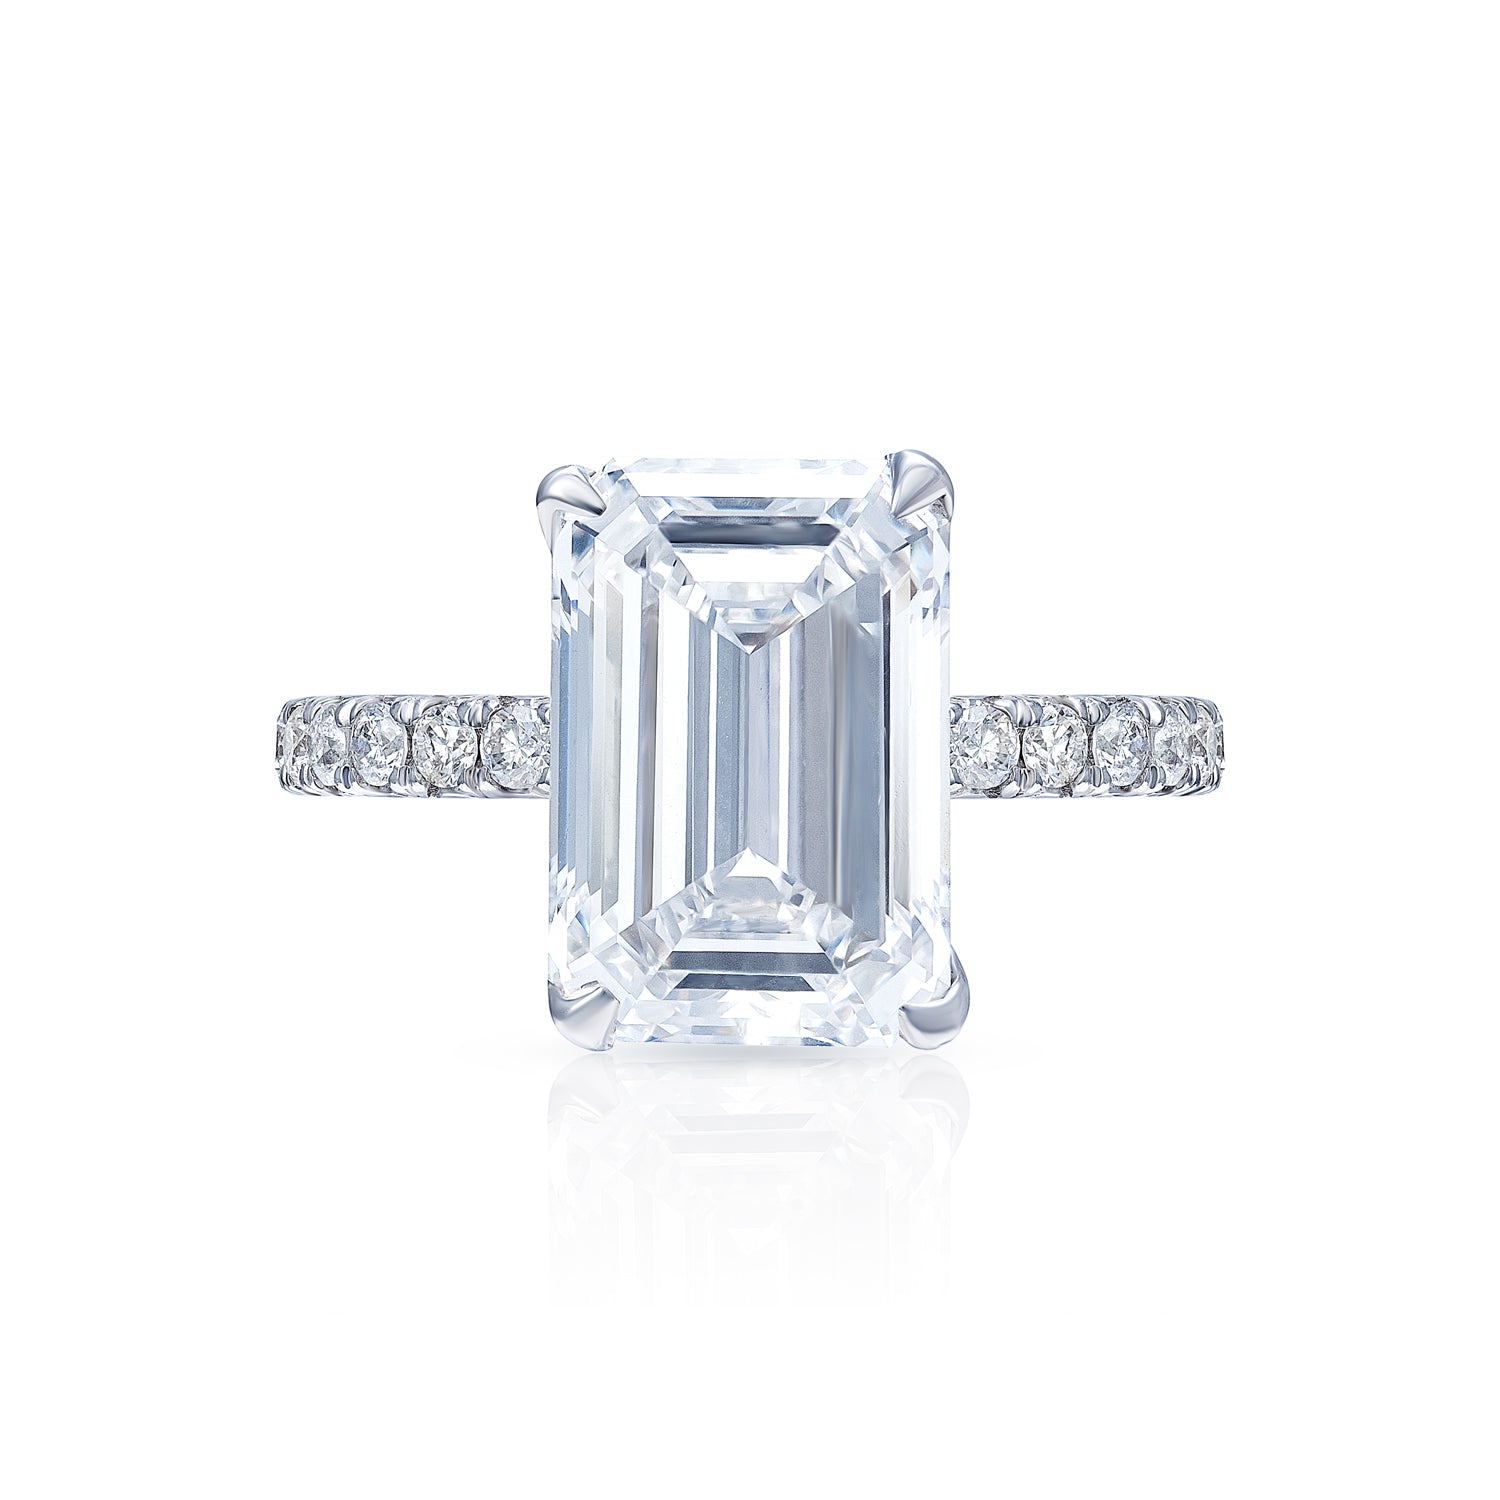 Louise 8 Carat F VS1 Emerald Cut Lab-Grown Diamond Engagement Ring in 18k White Gold Front View